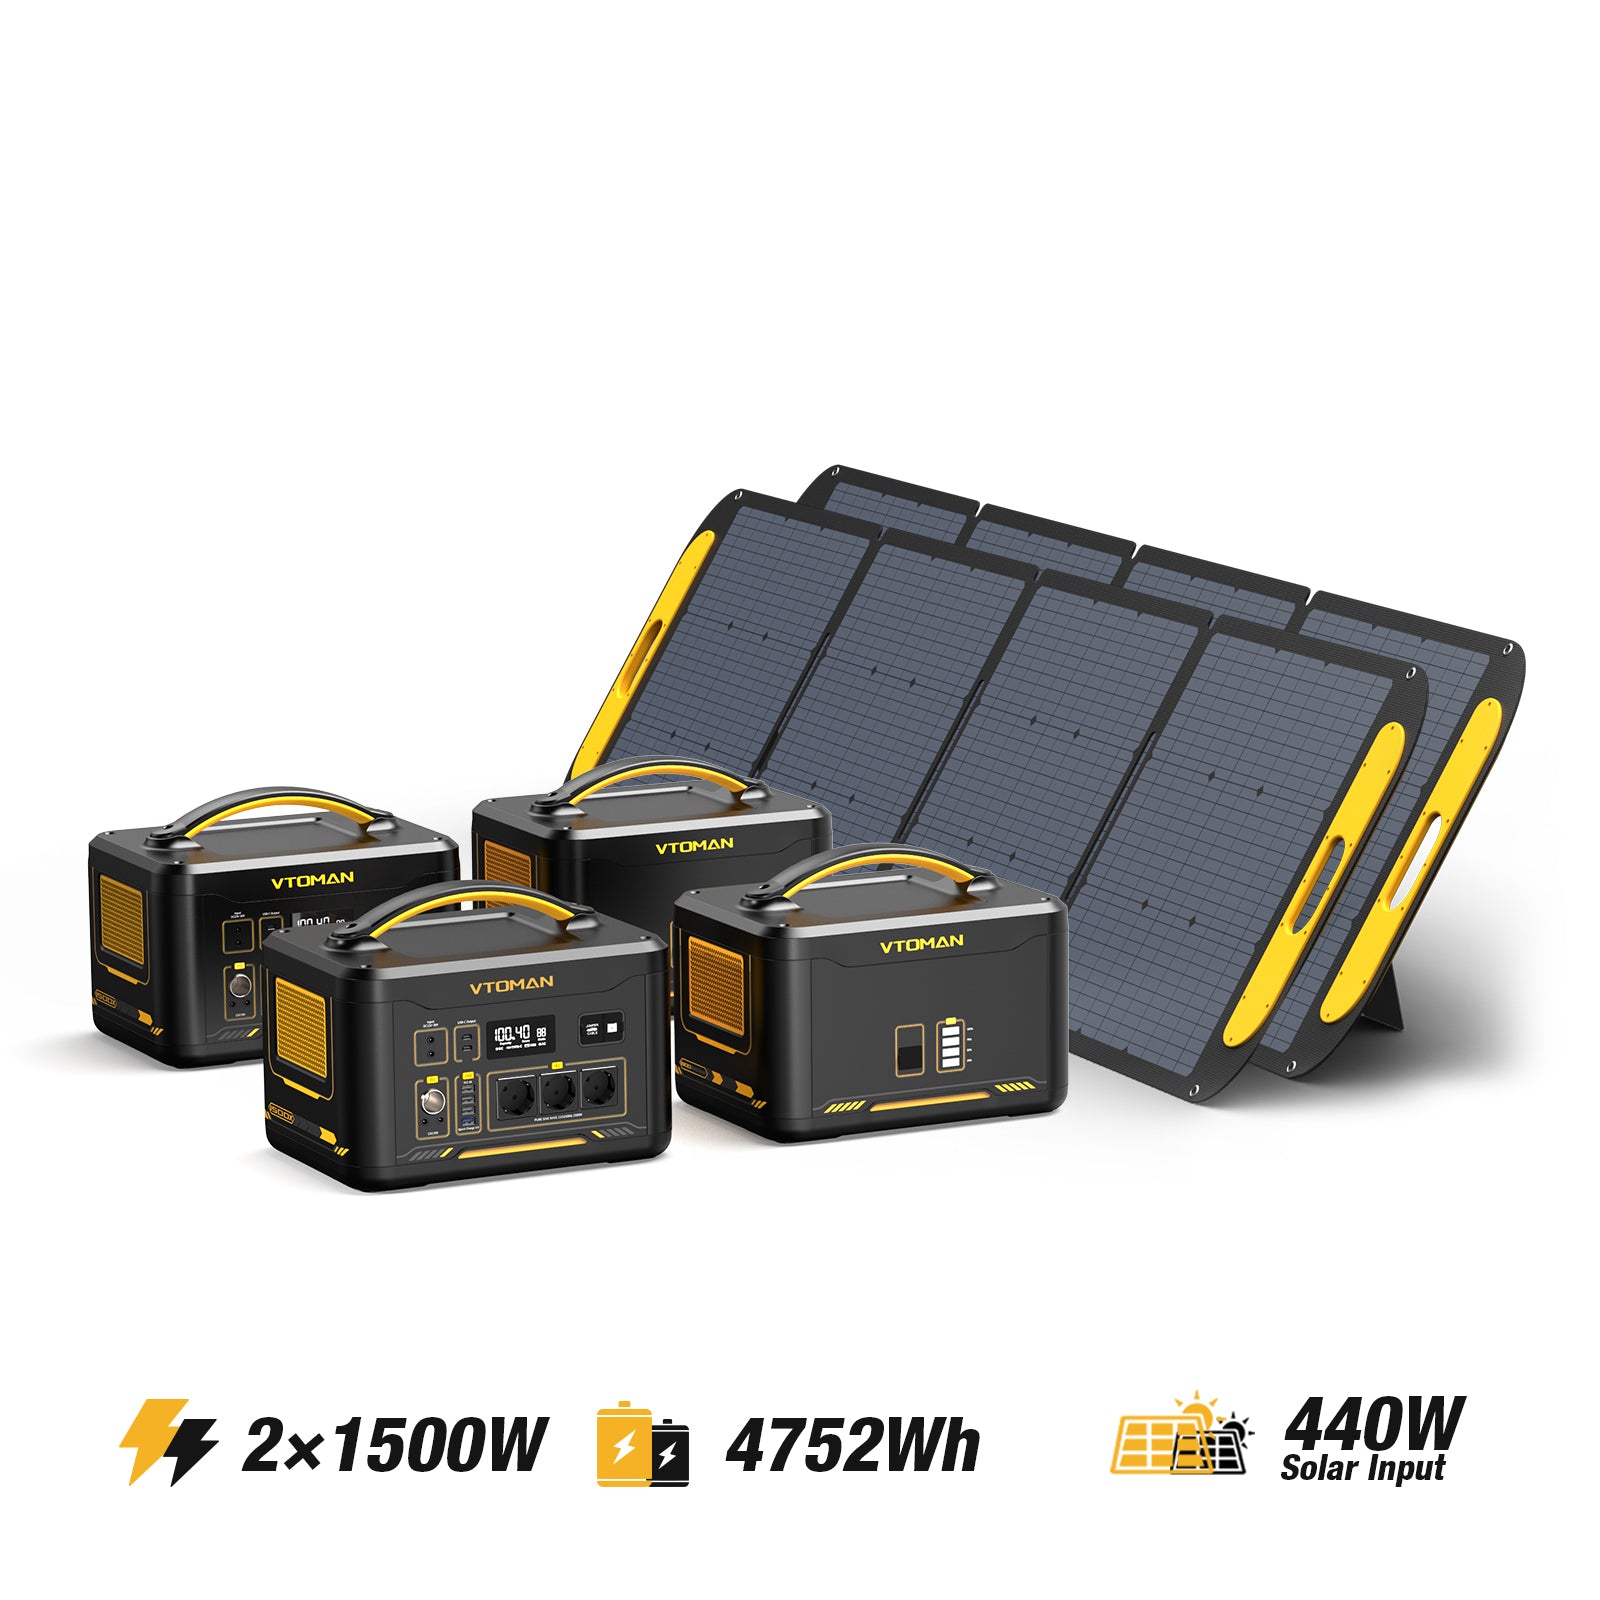 Jump 1500W/4752Wh 440W Solargenerator